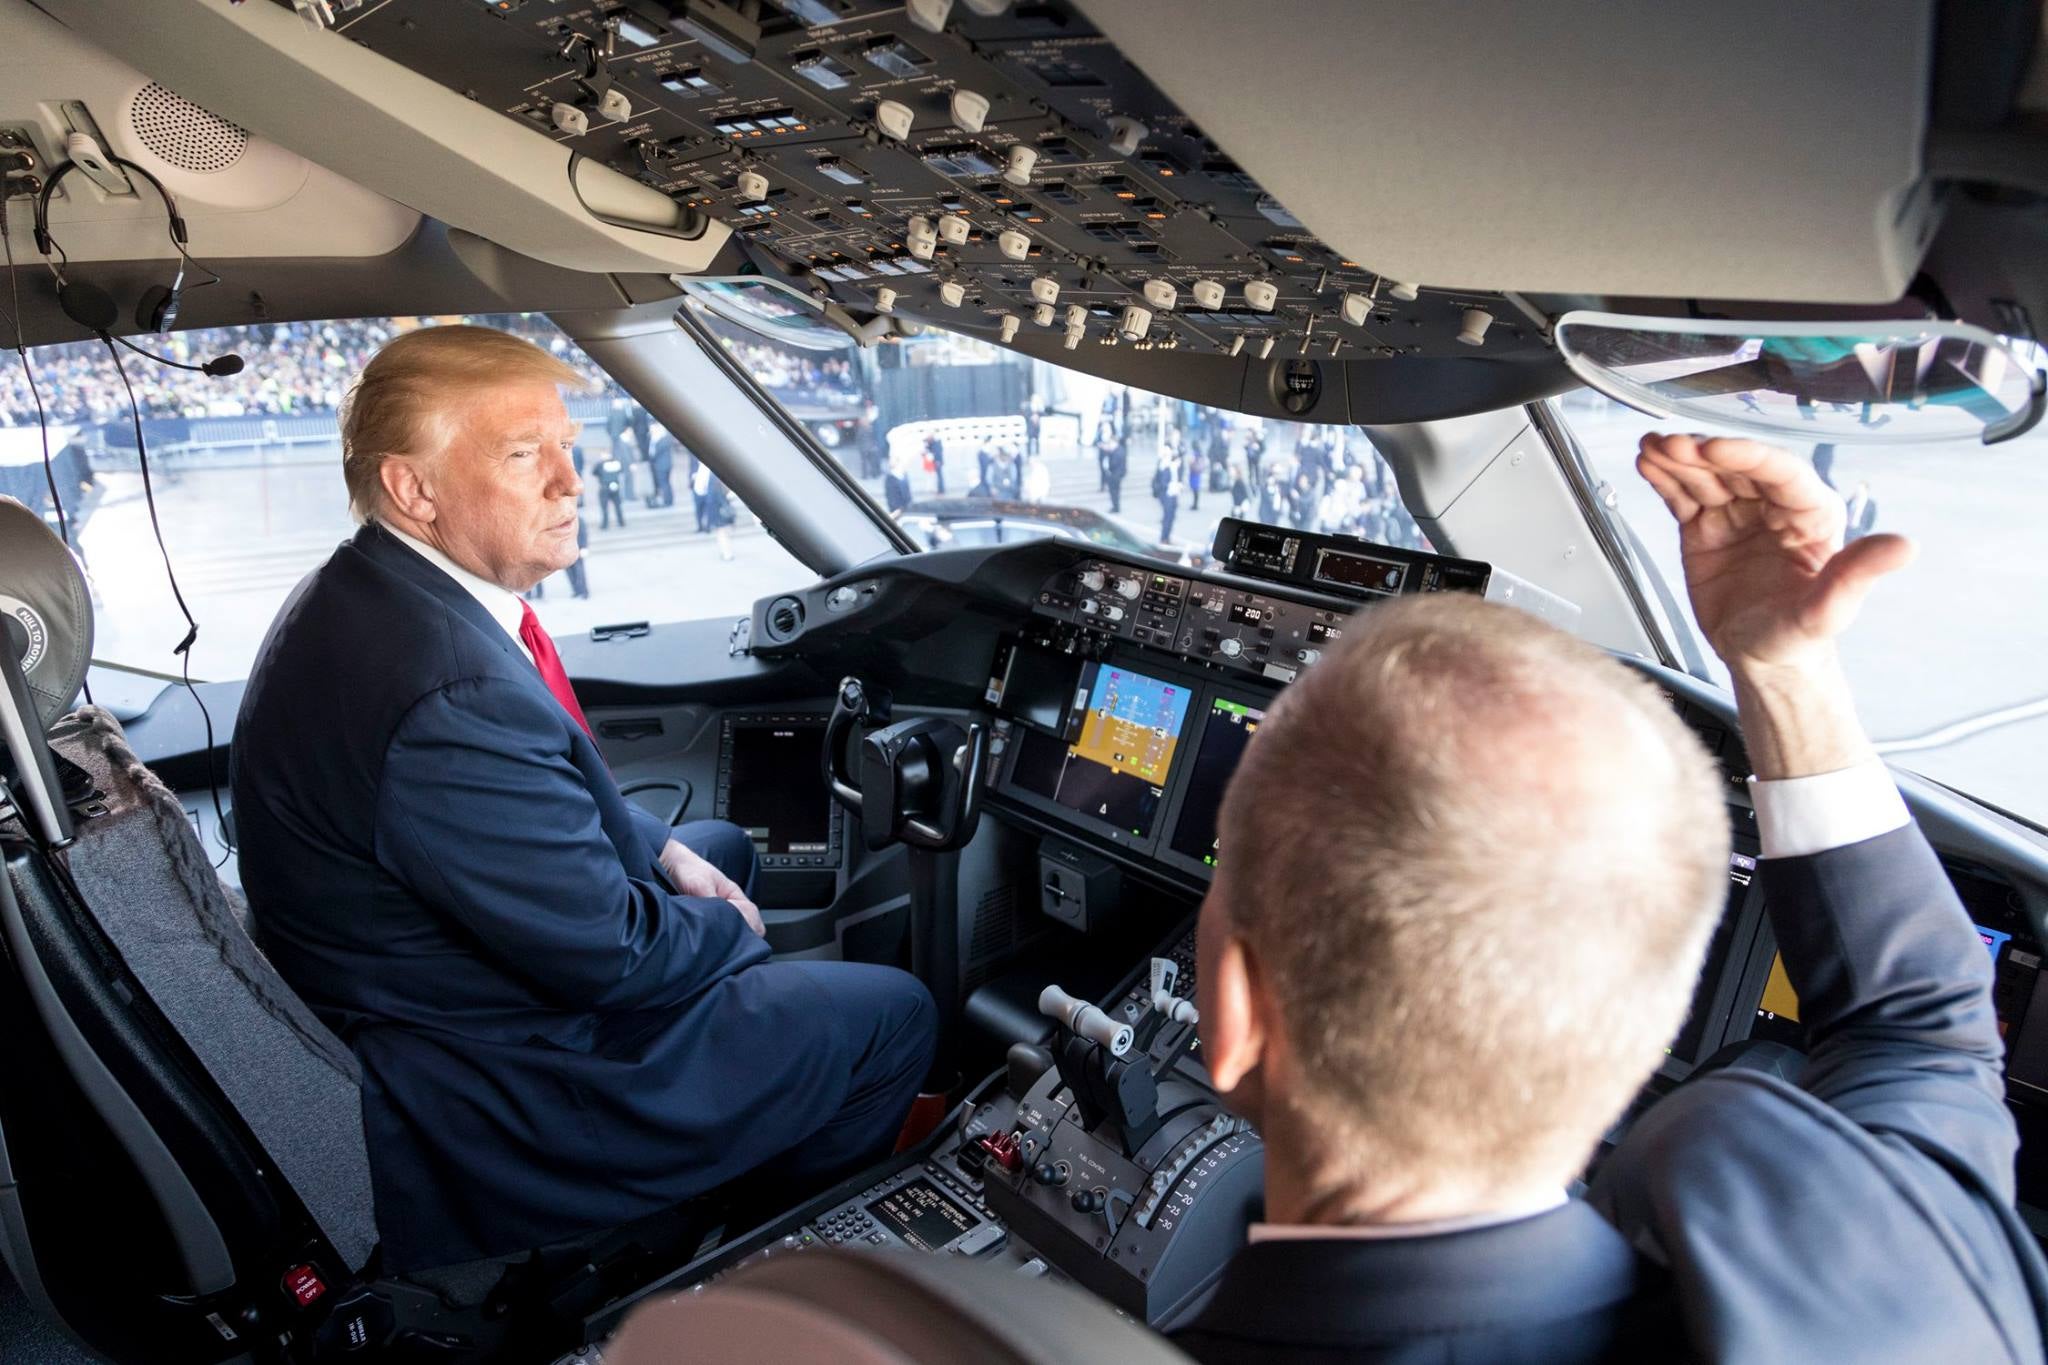 Trump Takes Credit for 2017 Being Commercial Aviation’s Safest Year